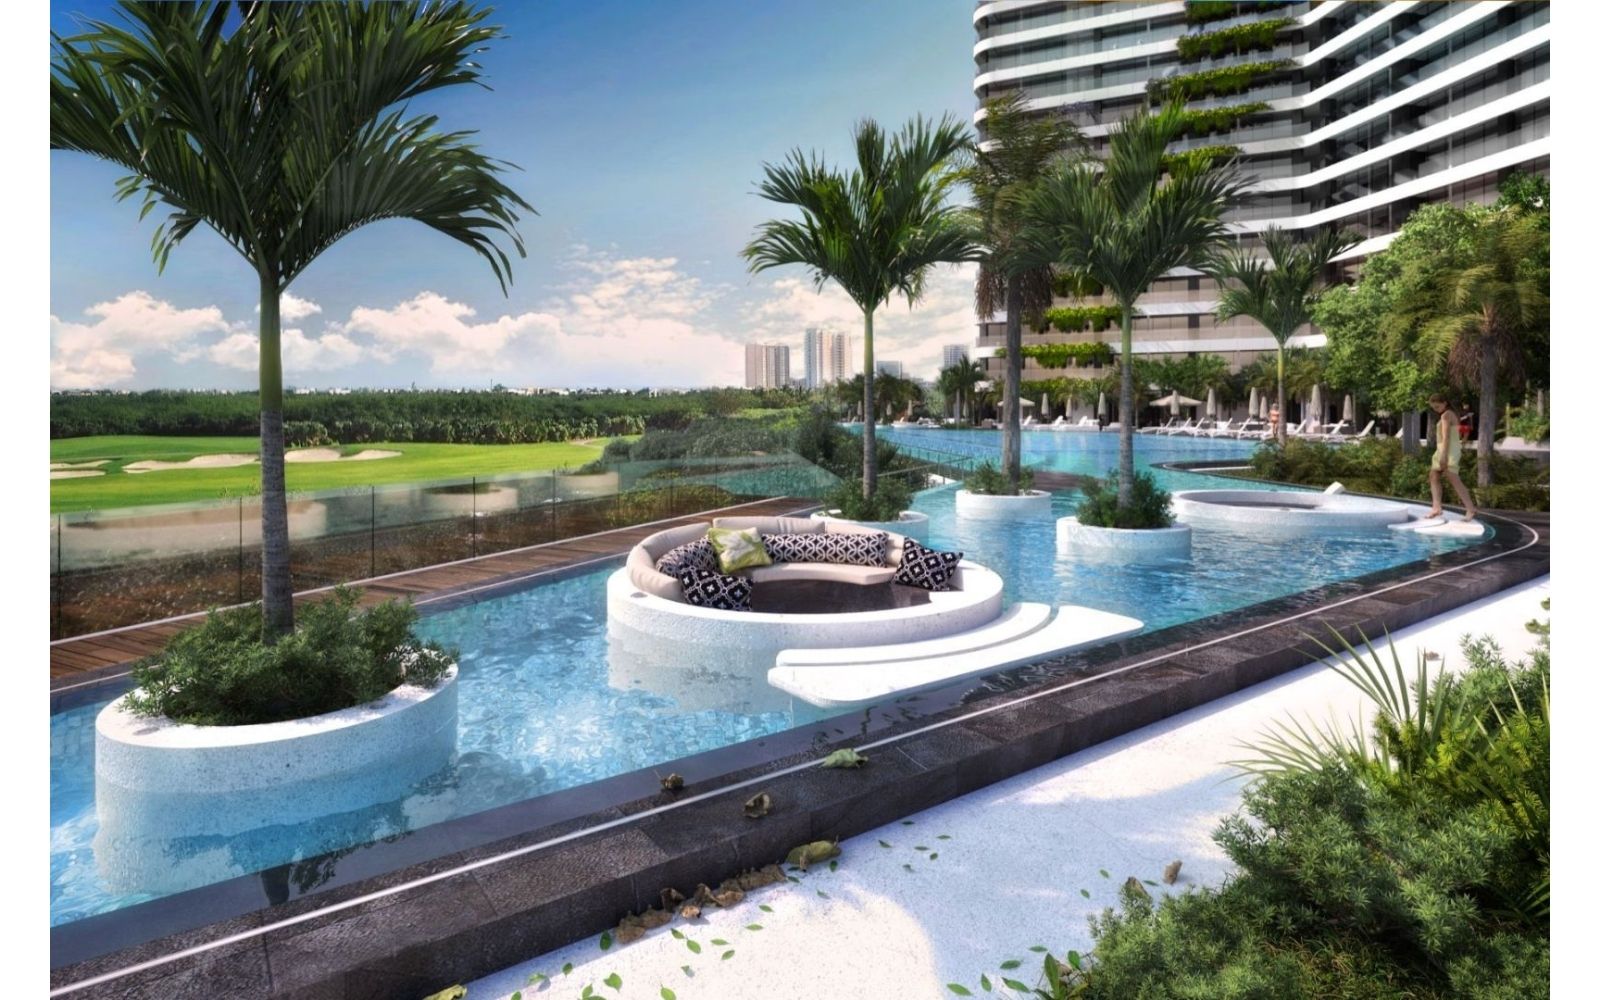 3-bedroom condo in front of the marina, overlooking the golf course